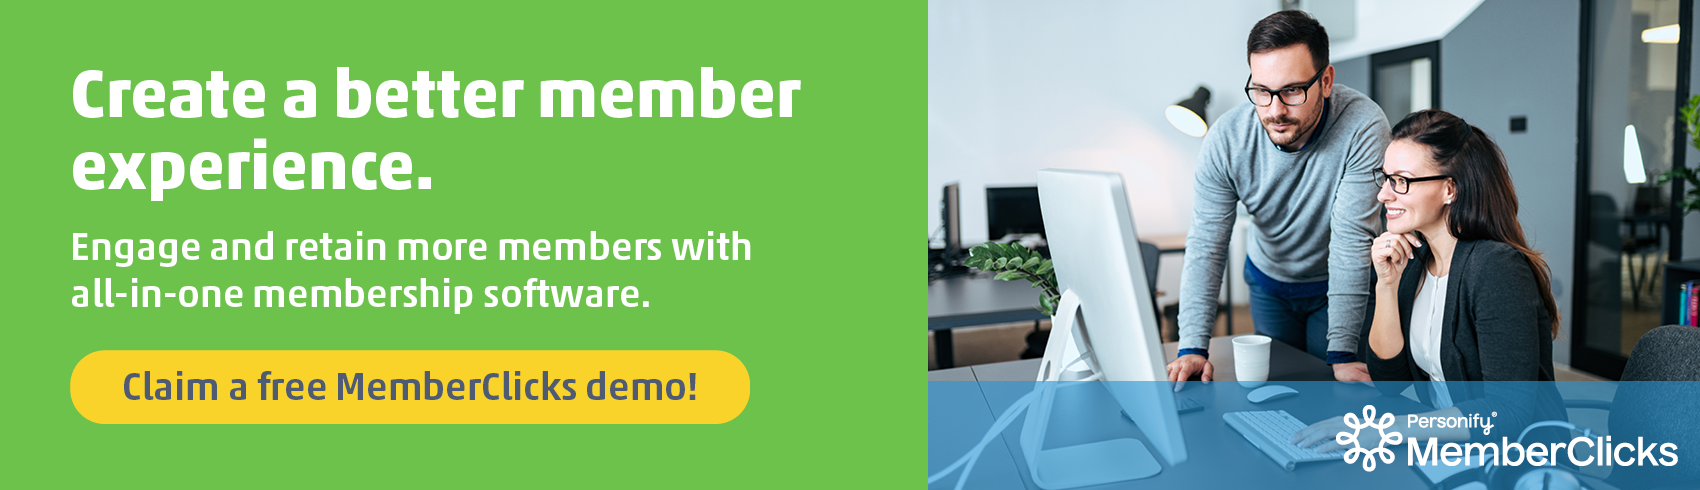 Schedule a demo to learn how MemberClicks can help you create more member types that improve your member acquisition.